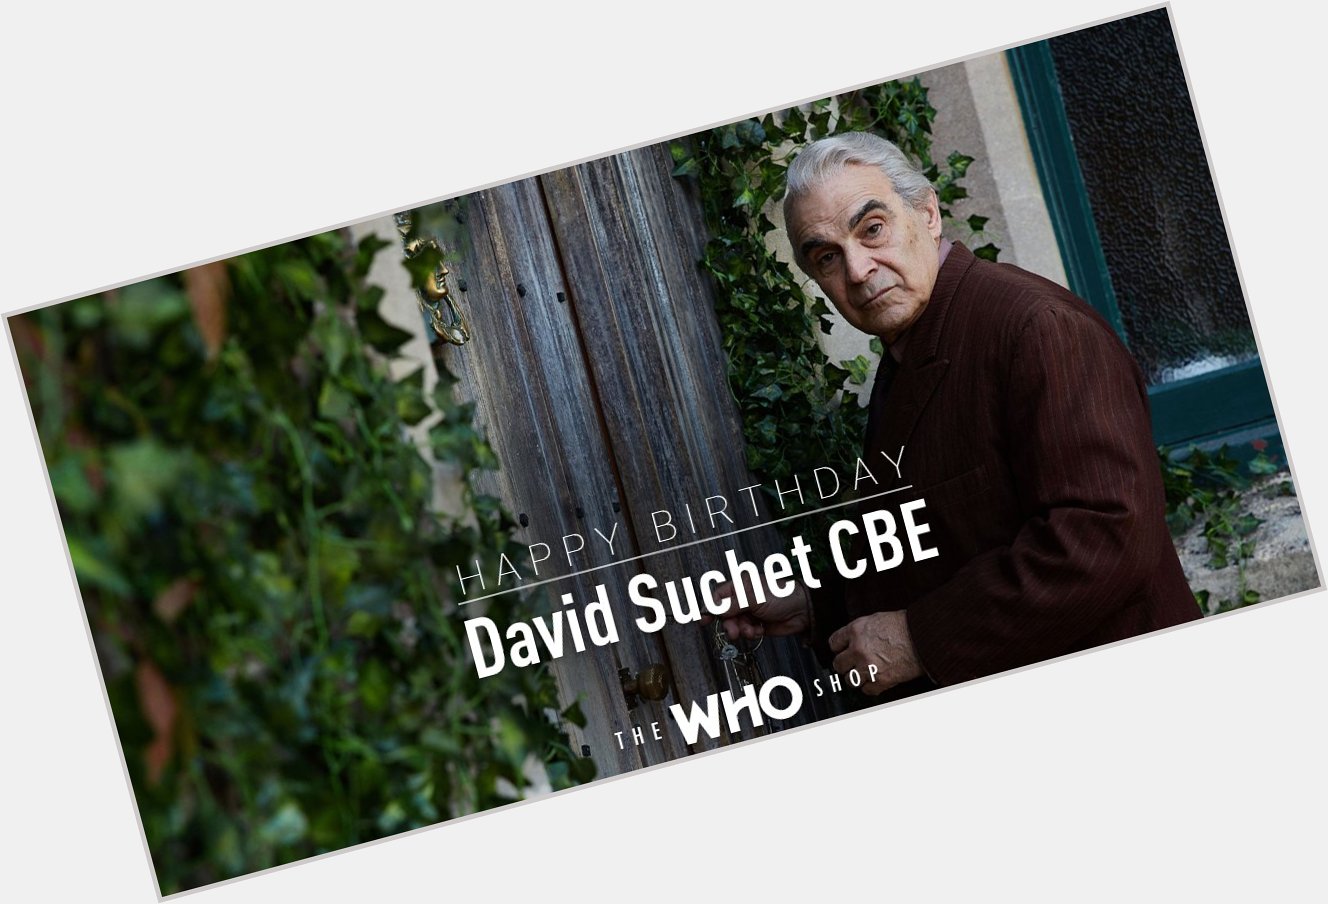 Happy 75th Birthday David Suchet CBE who played The Landlord in \Knock Knock\ 